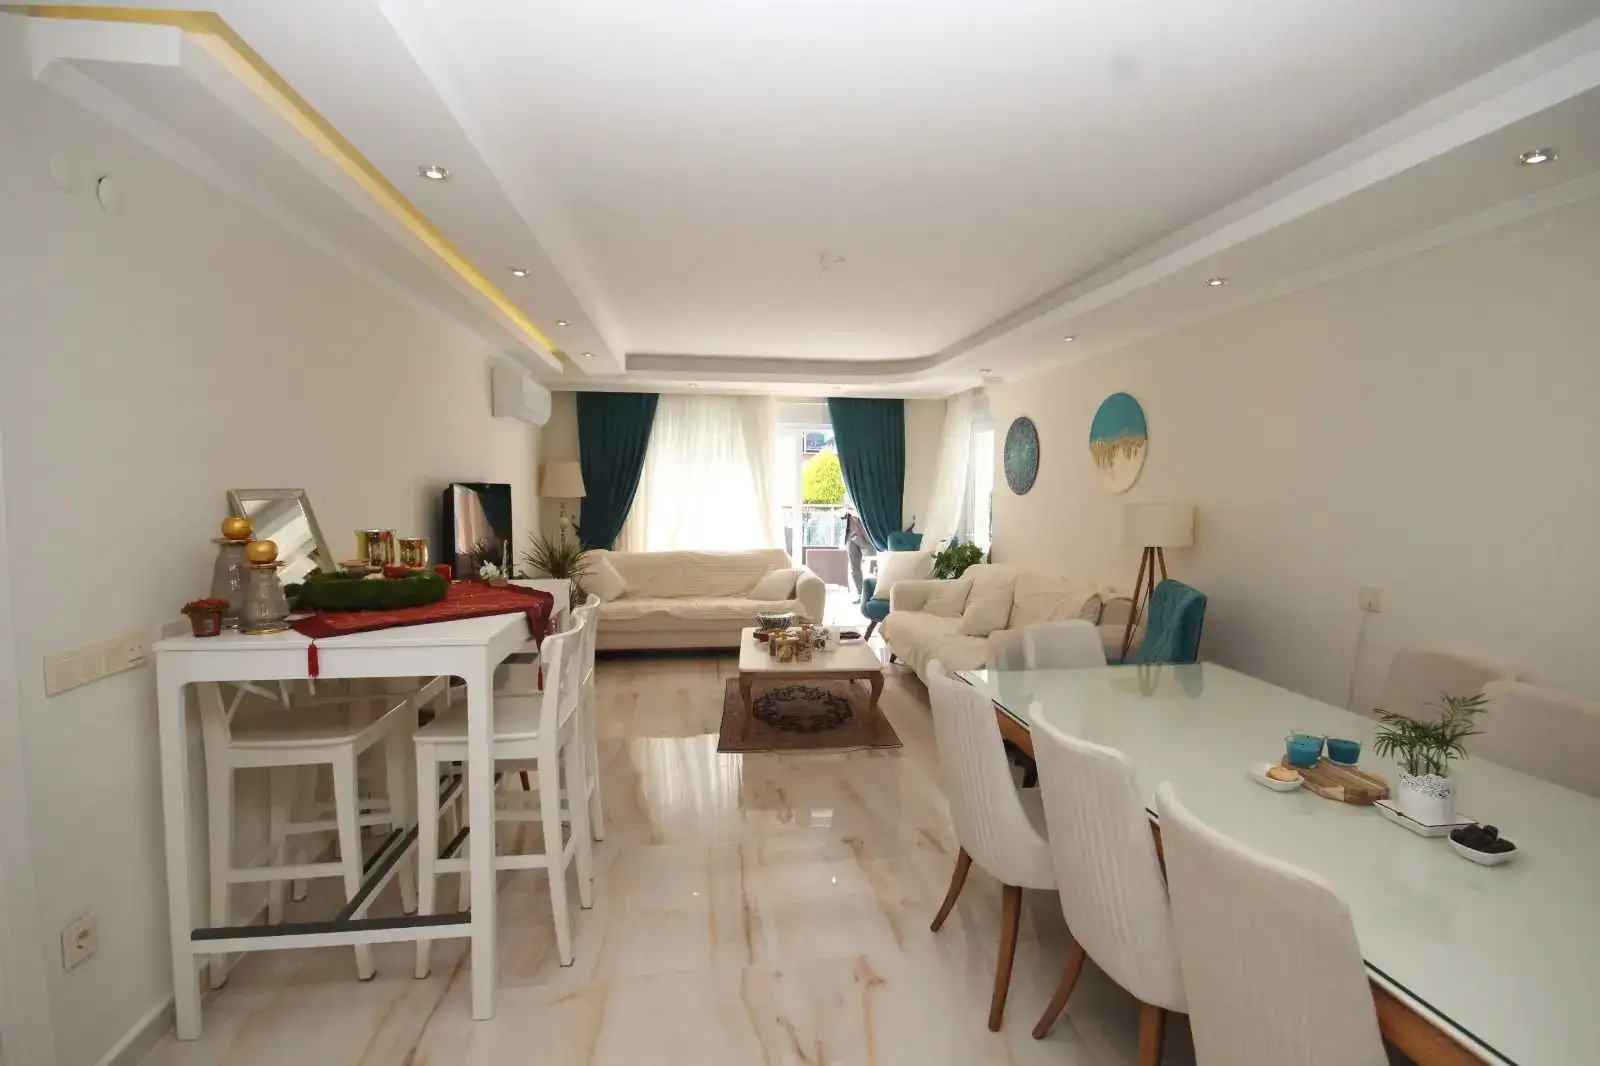 2+1 FULL ACTİVİTY APARTMENT FOR SALE İN CİKCİLLİ- ALANYA